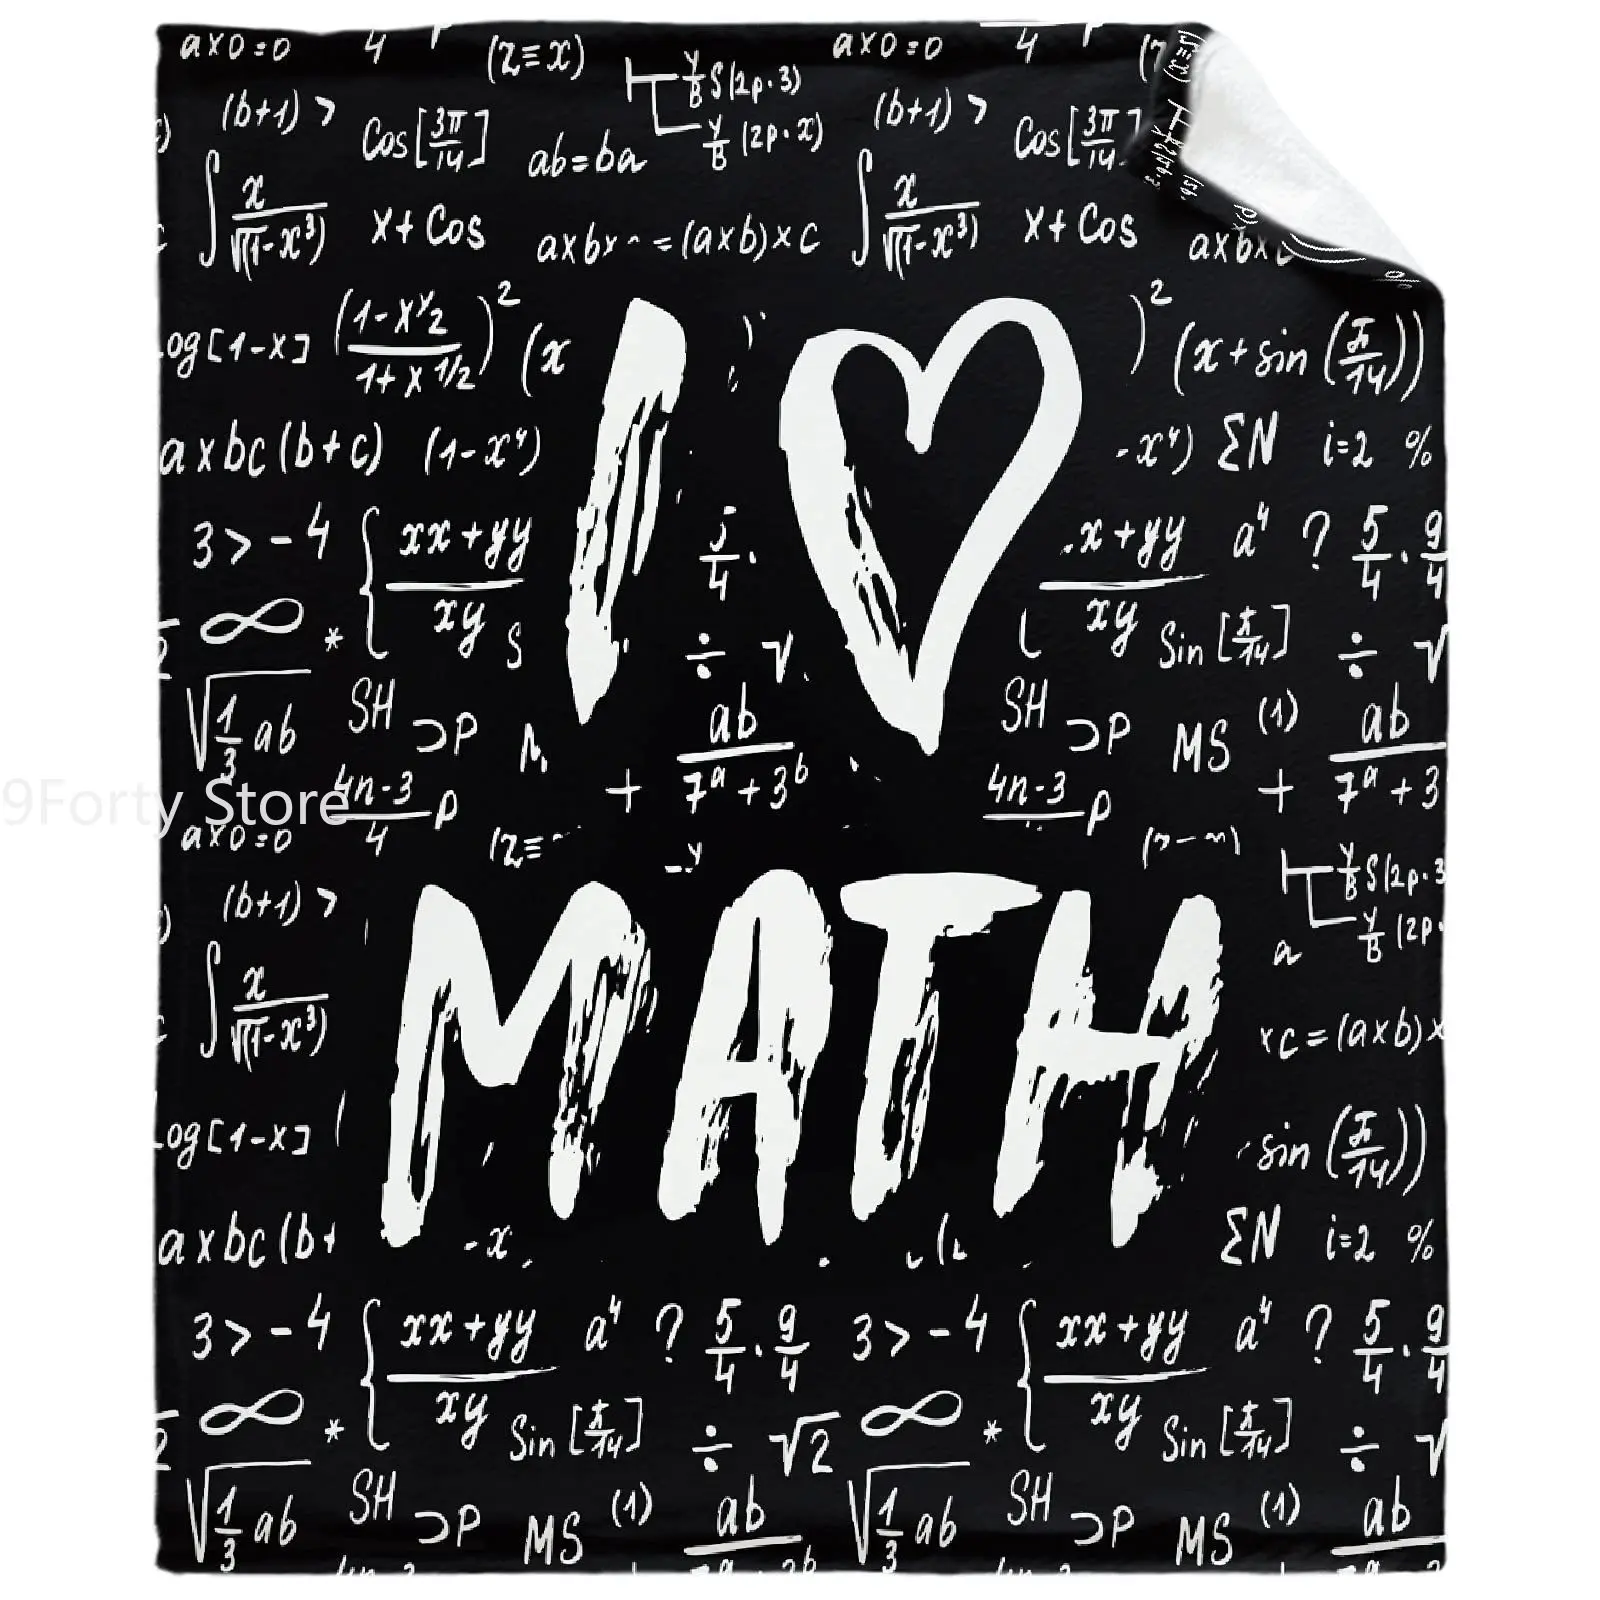 

I Love Math Plush Fuzzy Throw Flannel Nap Blanket for Travel Picnic,Bed,Sofa Warm Blanket All Seasons,Personalized Festival Gift